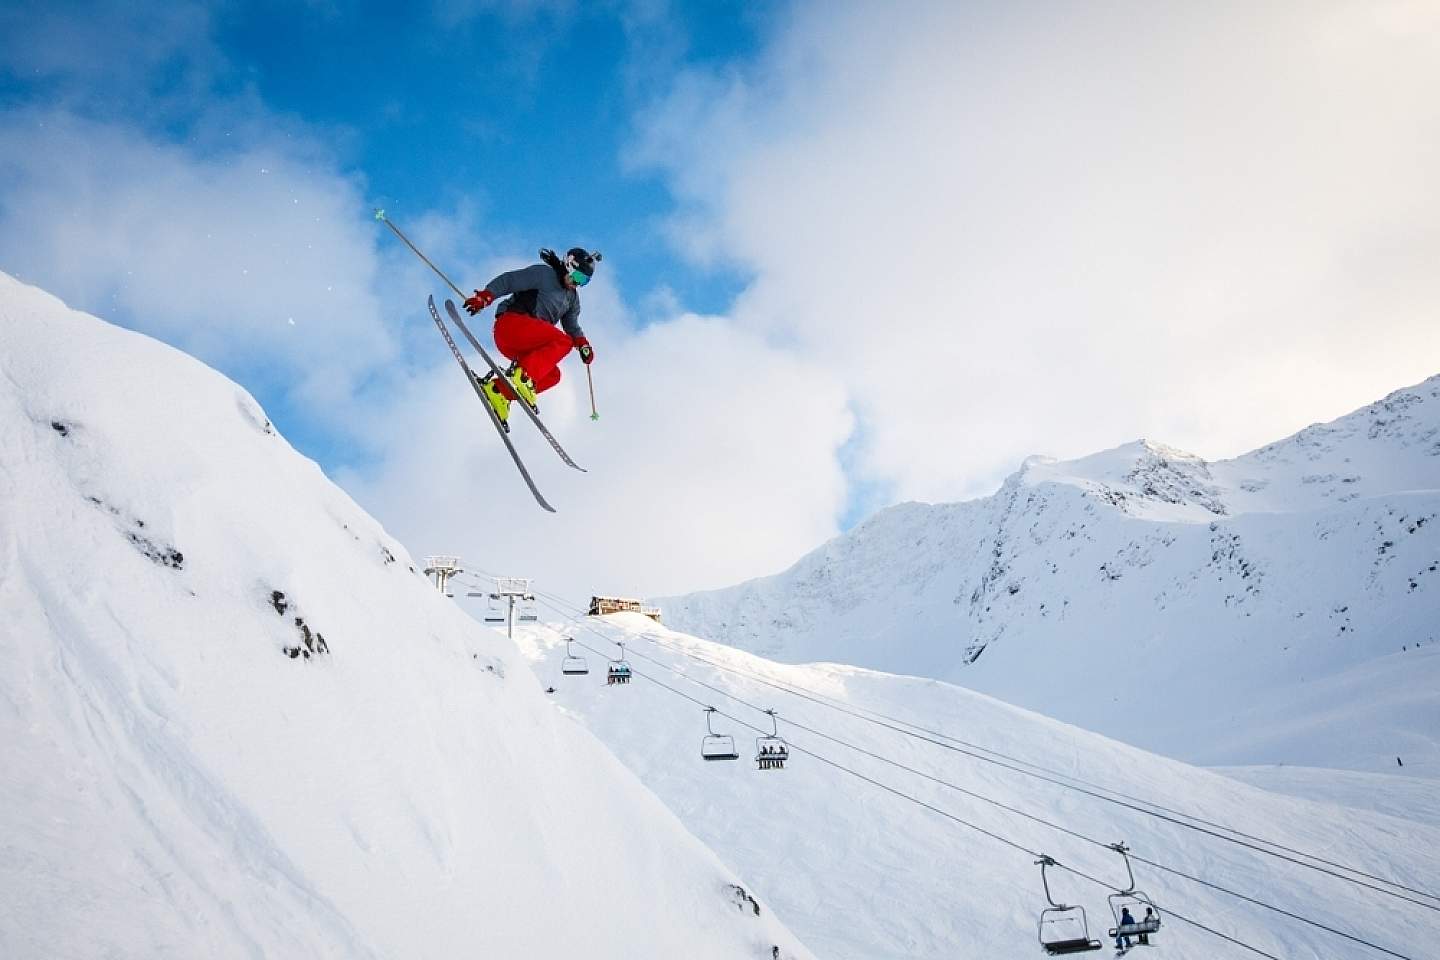 Go downhill or cross-country skiing at the acclaimed Alyeska Resort